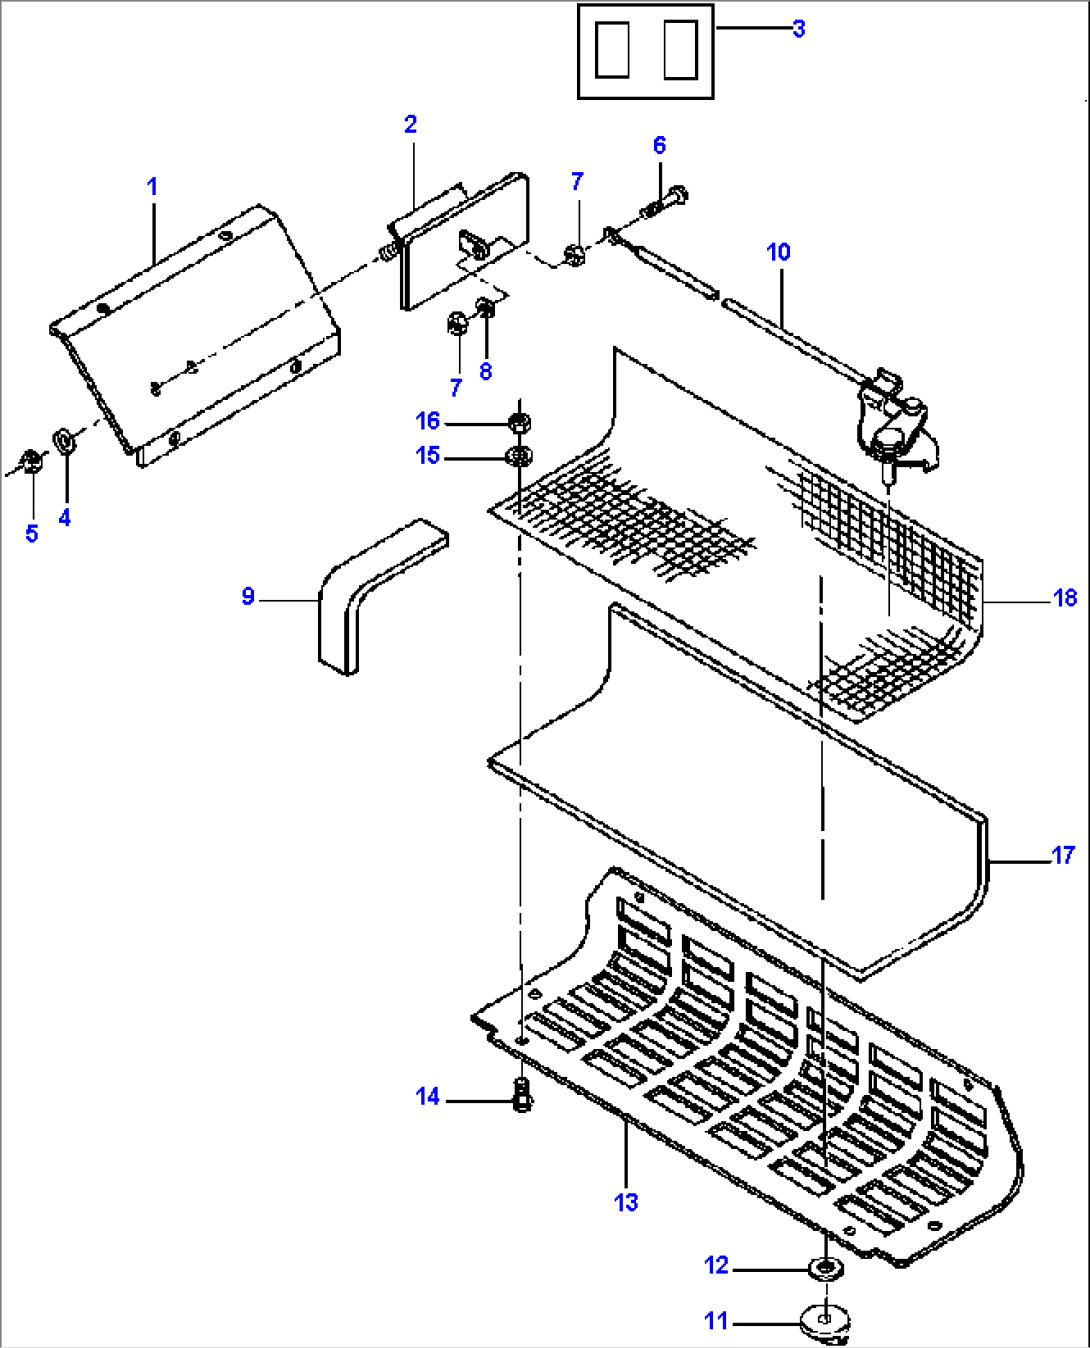 FIG. K5330-01A2 CAB VENT WITH AIR CONDITIONING